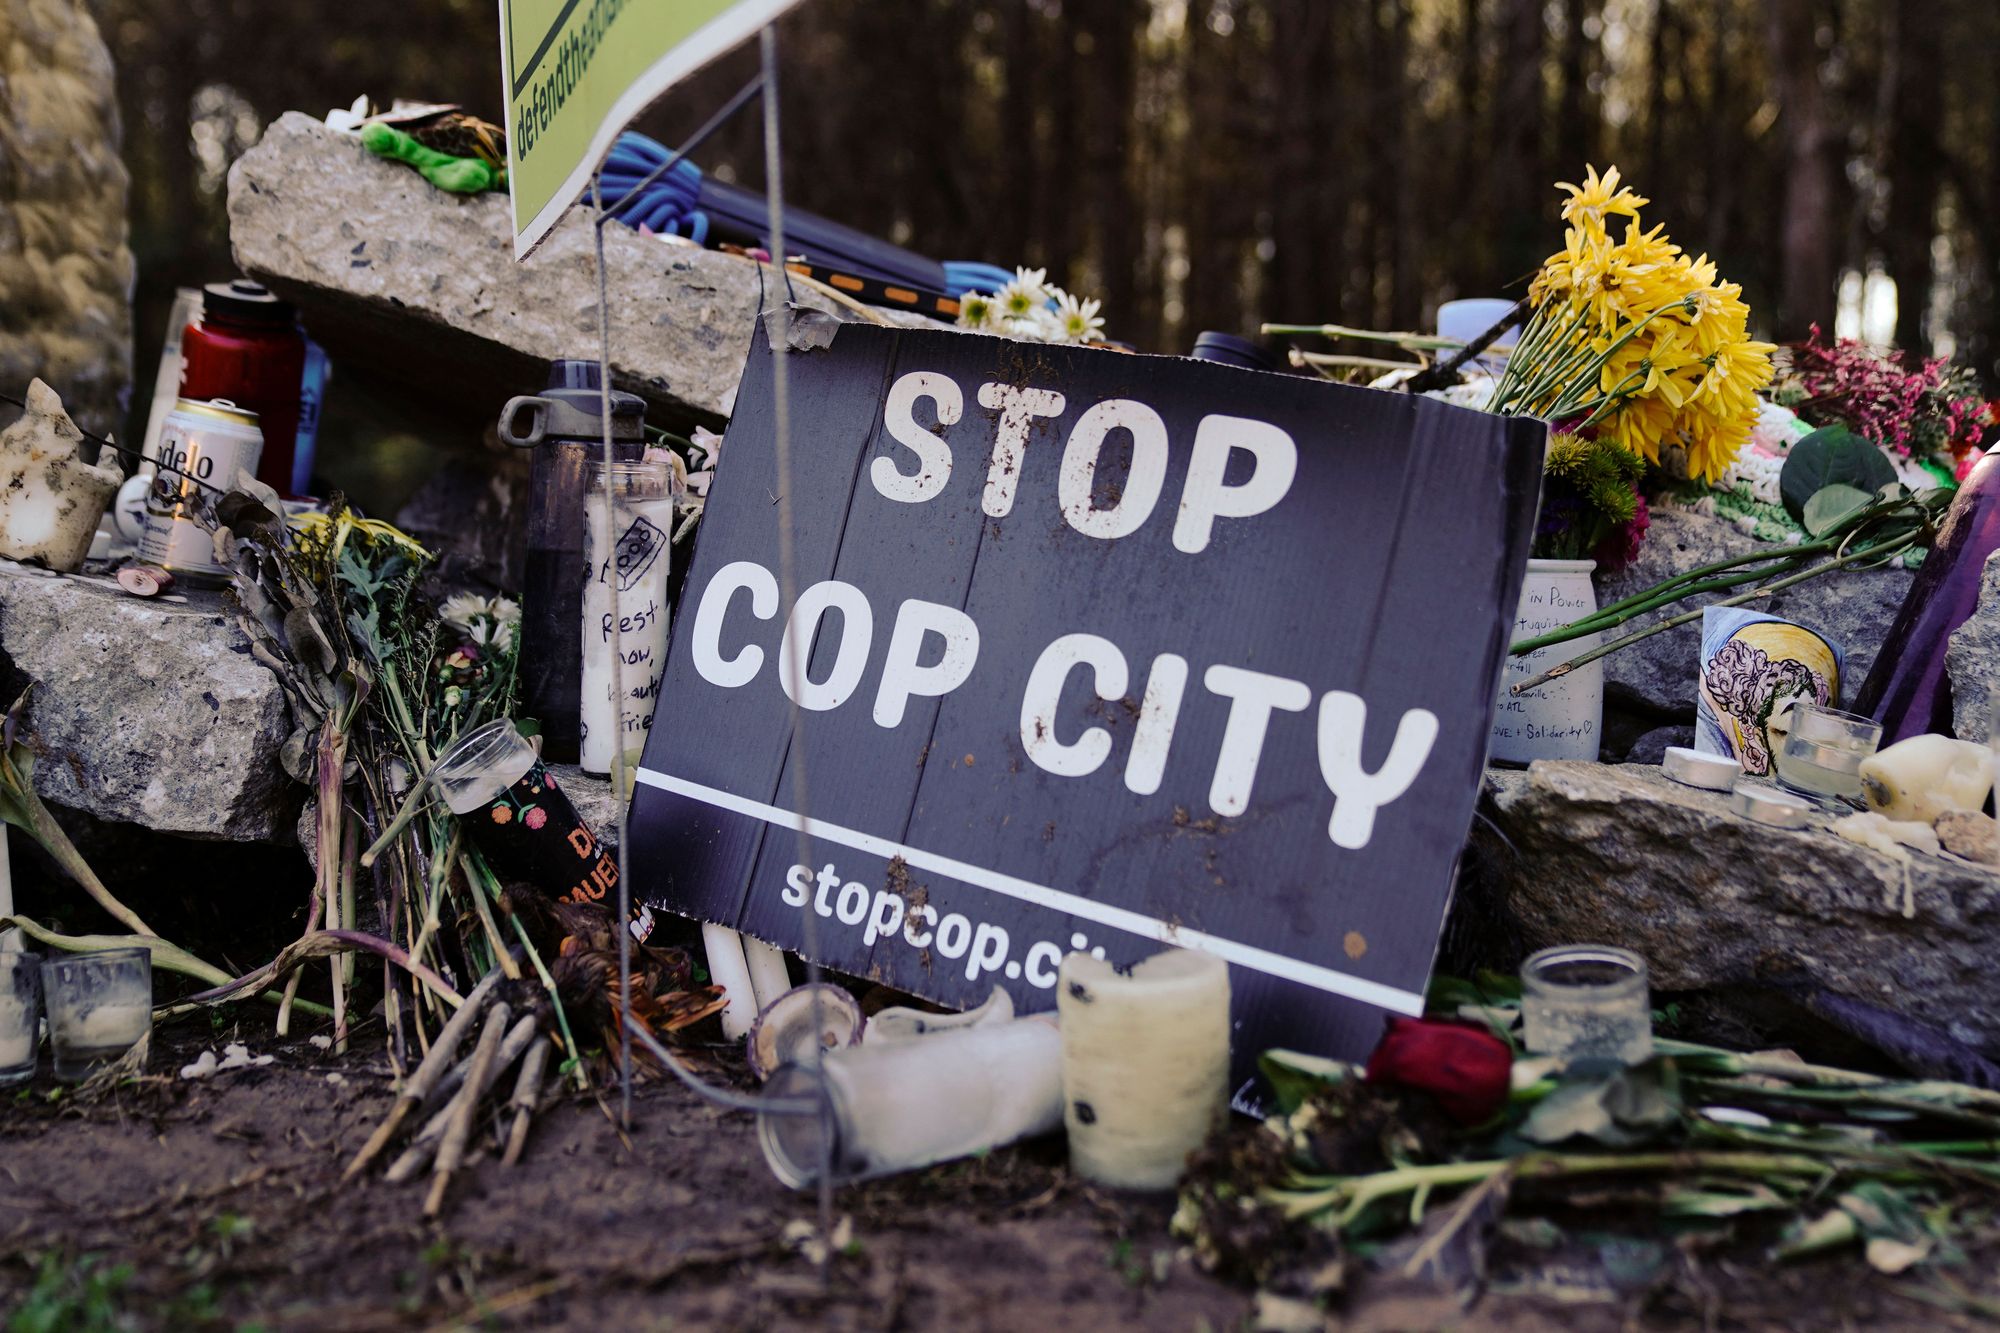 The movement to Stop Cop City isn’t going anywhere